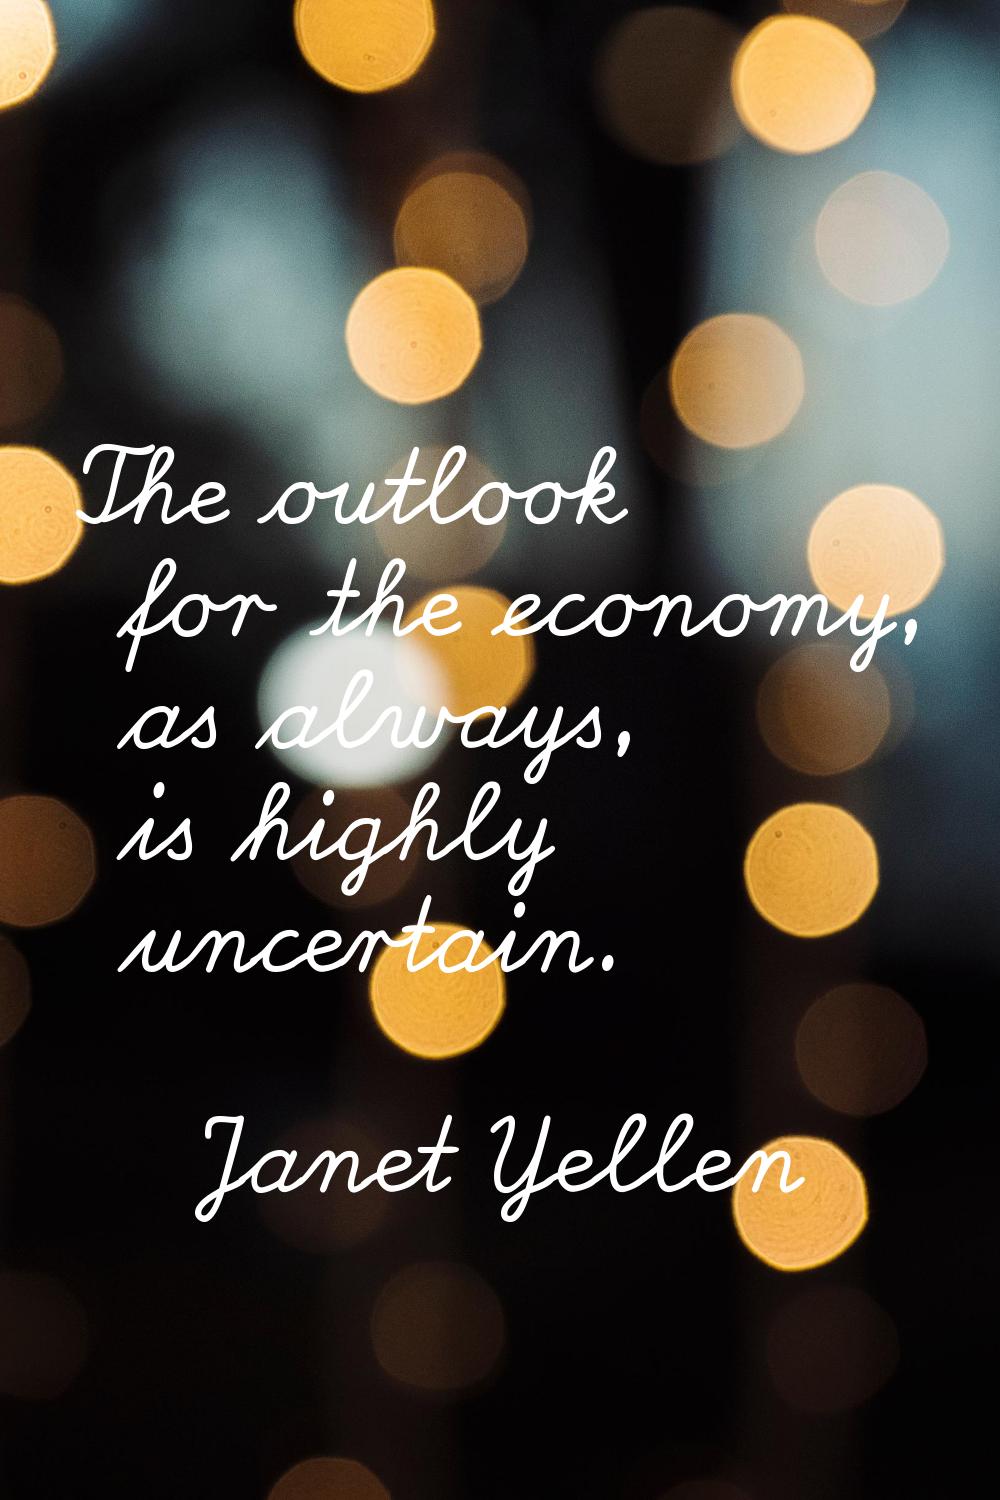 The outlook for the economy, as always, is highly uncertain.